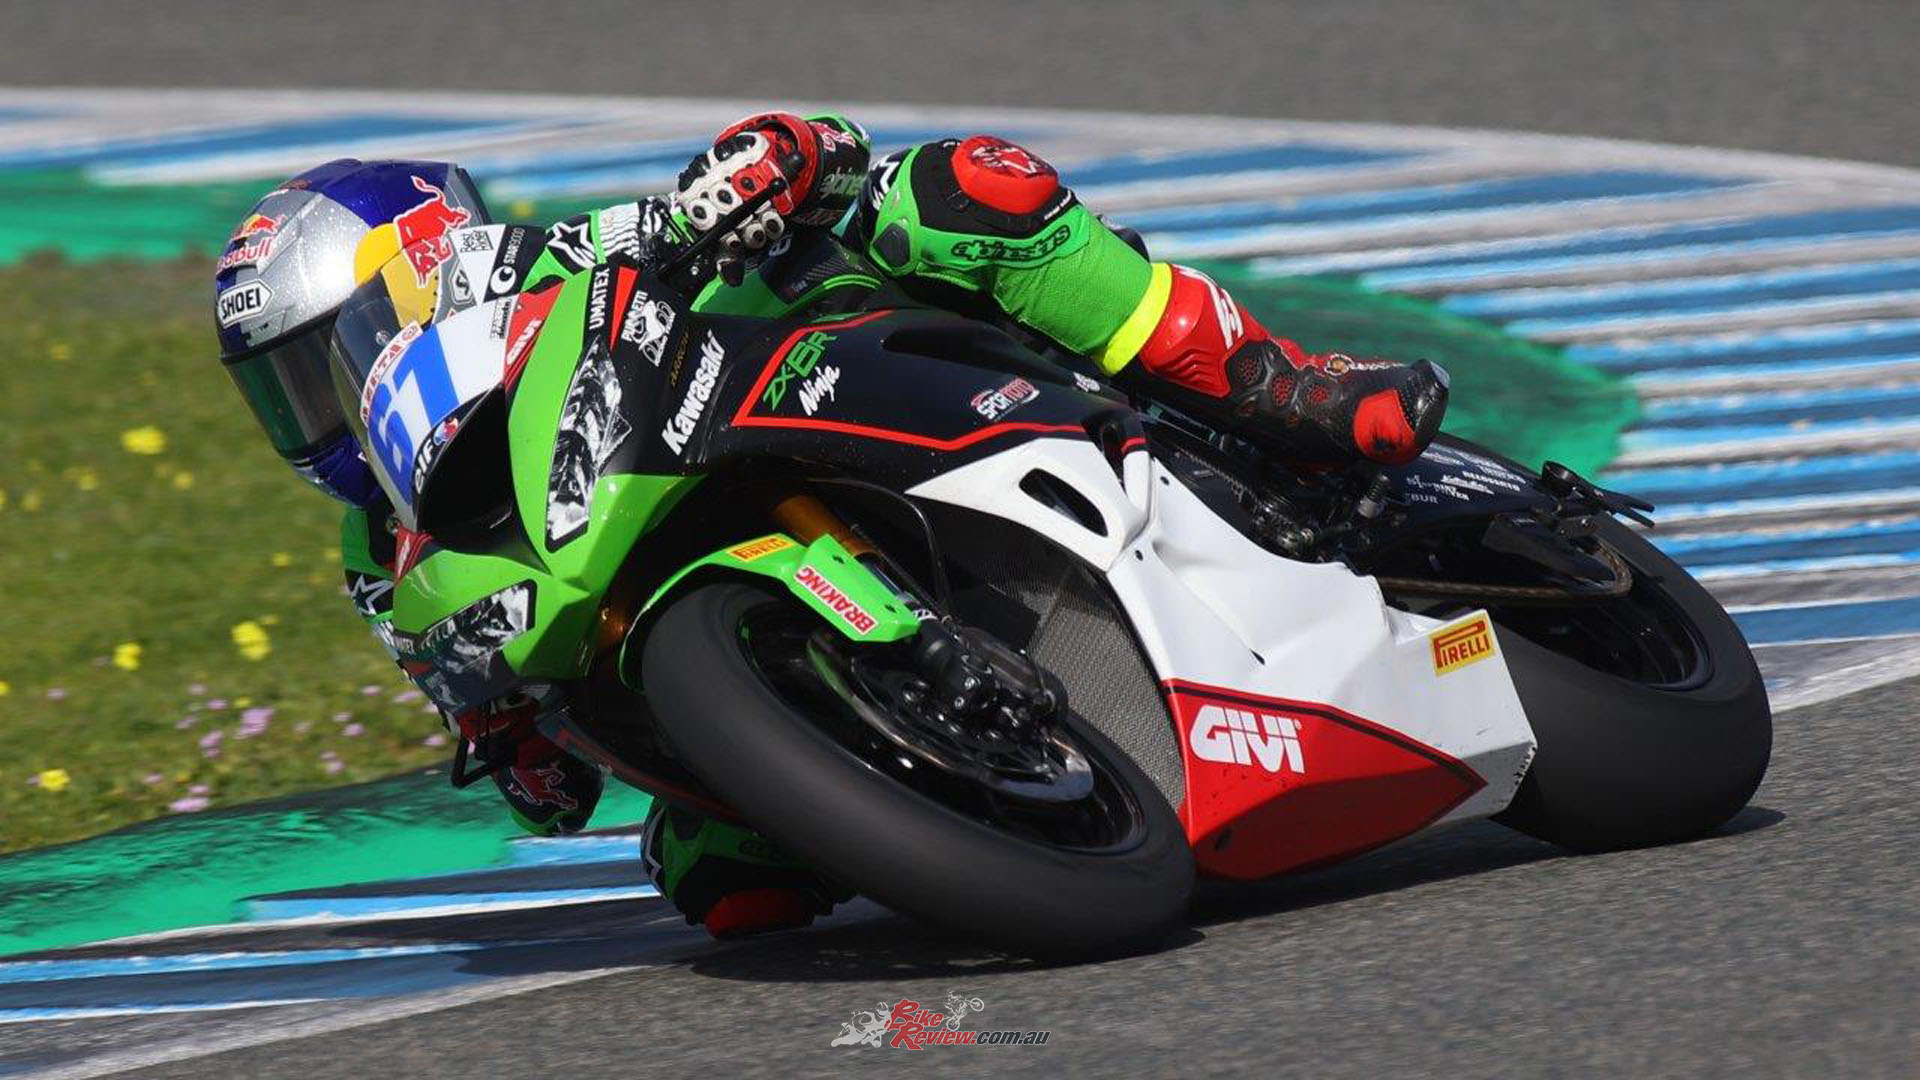 Tuuli was followed by Turkish duo Can Öncü (Kawasaki Puccetti Racing) and Kenan Sofuoglu, with the latter switching his attentions to Kawasaki Puccetti in the afternoon.